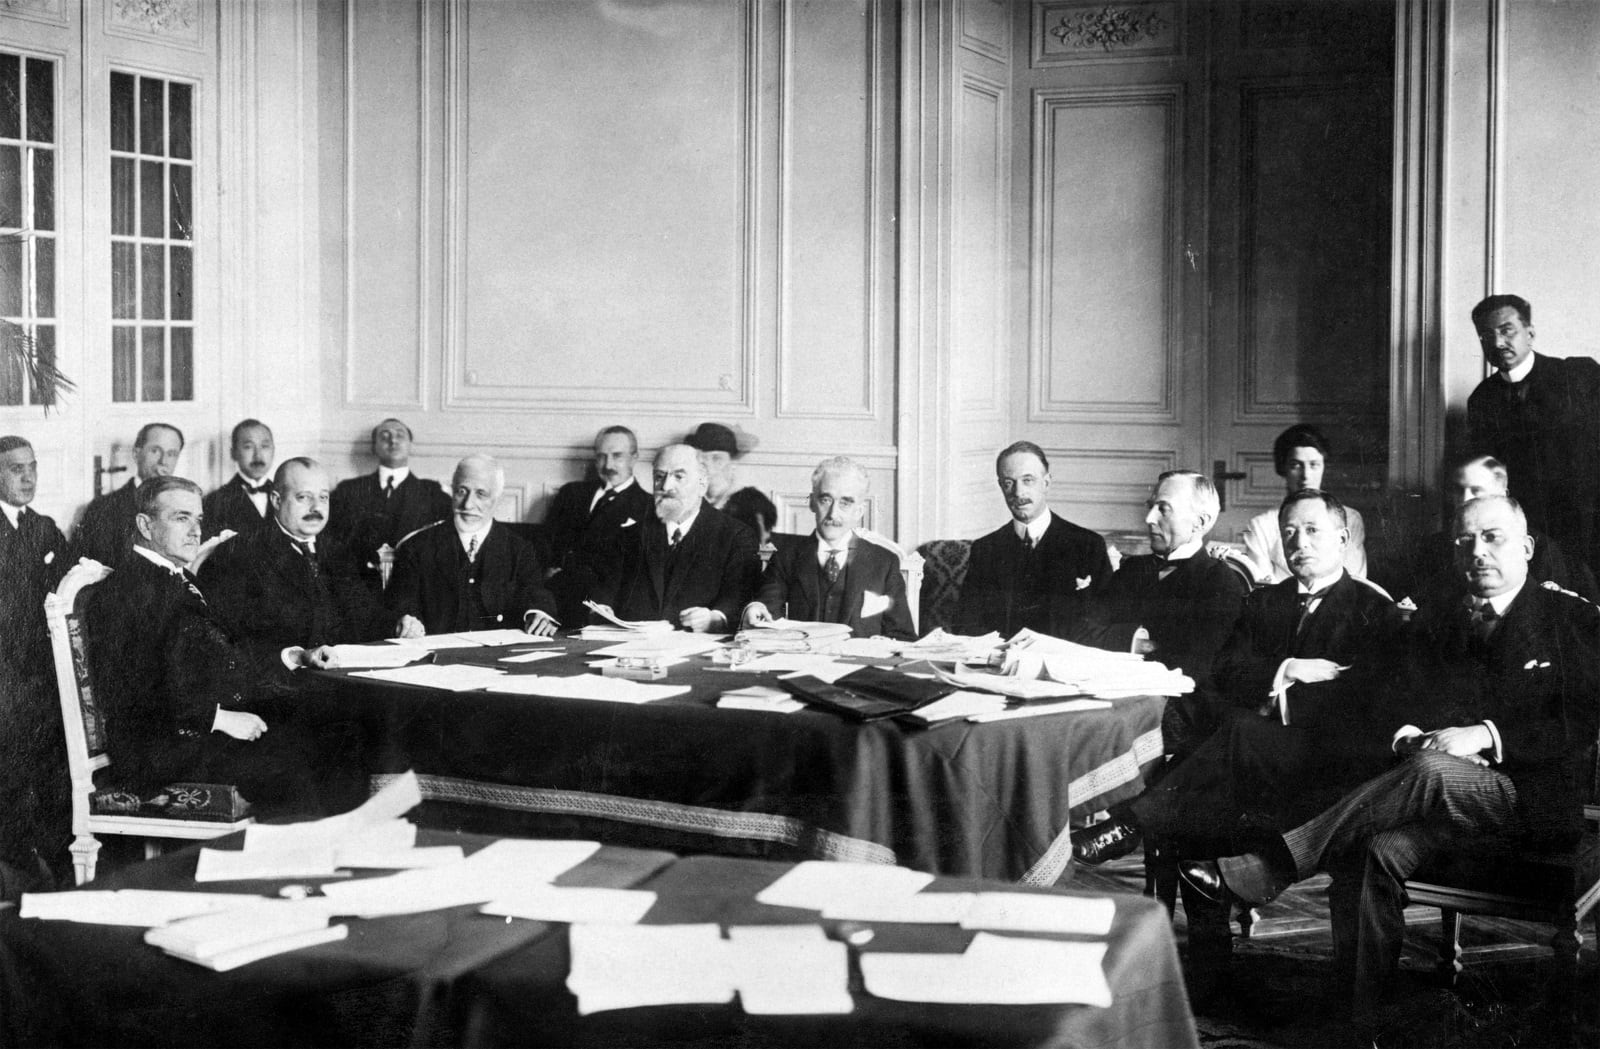 The first meeting of the League of Nations took place in Geneva, Switzerland, on 29 November 1920 (Interim Archives/Getty Images)